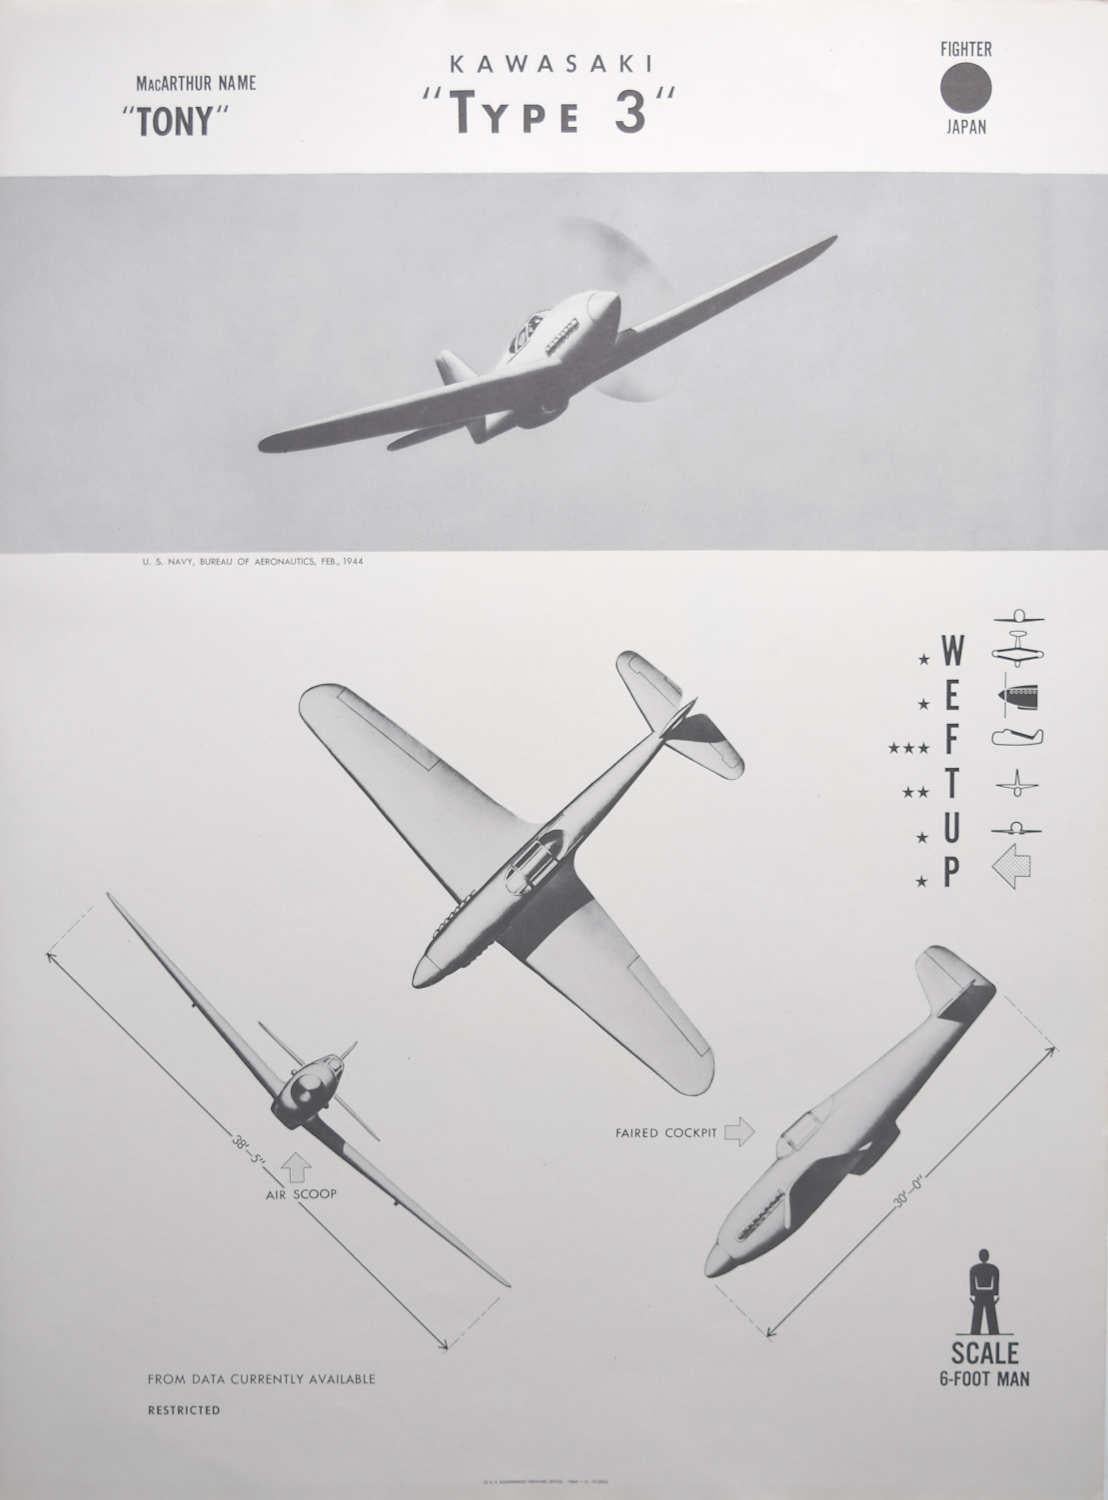 1943 Kawasaki "Type 3" Japanese fighter plane identification poster WW2 - Print by Unknown